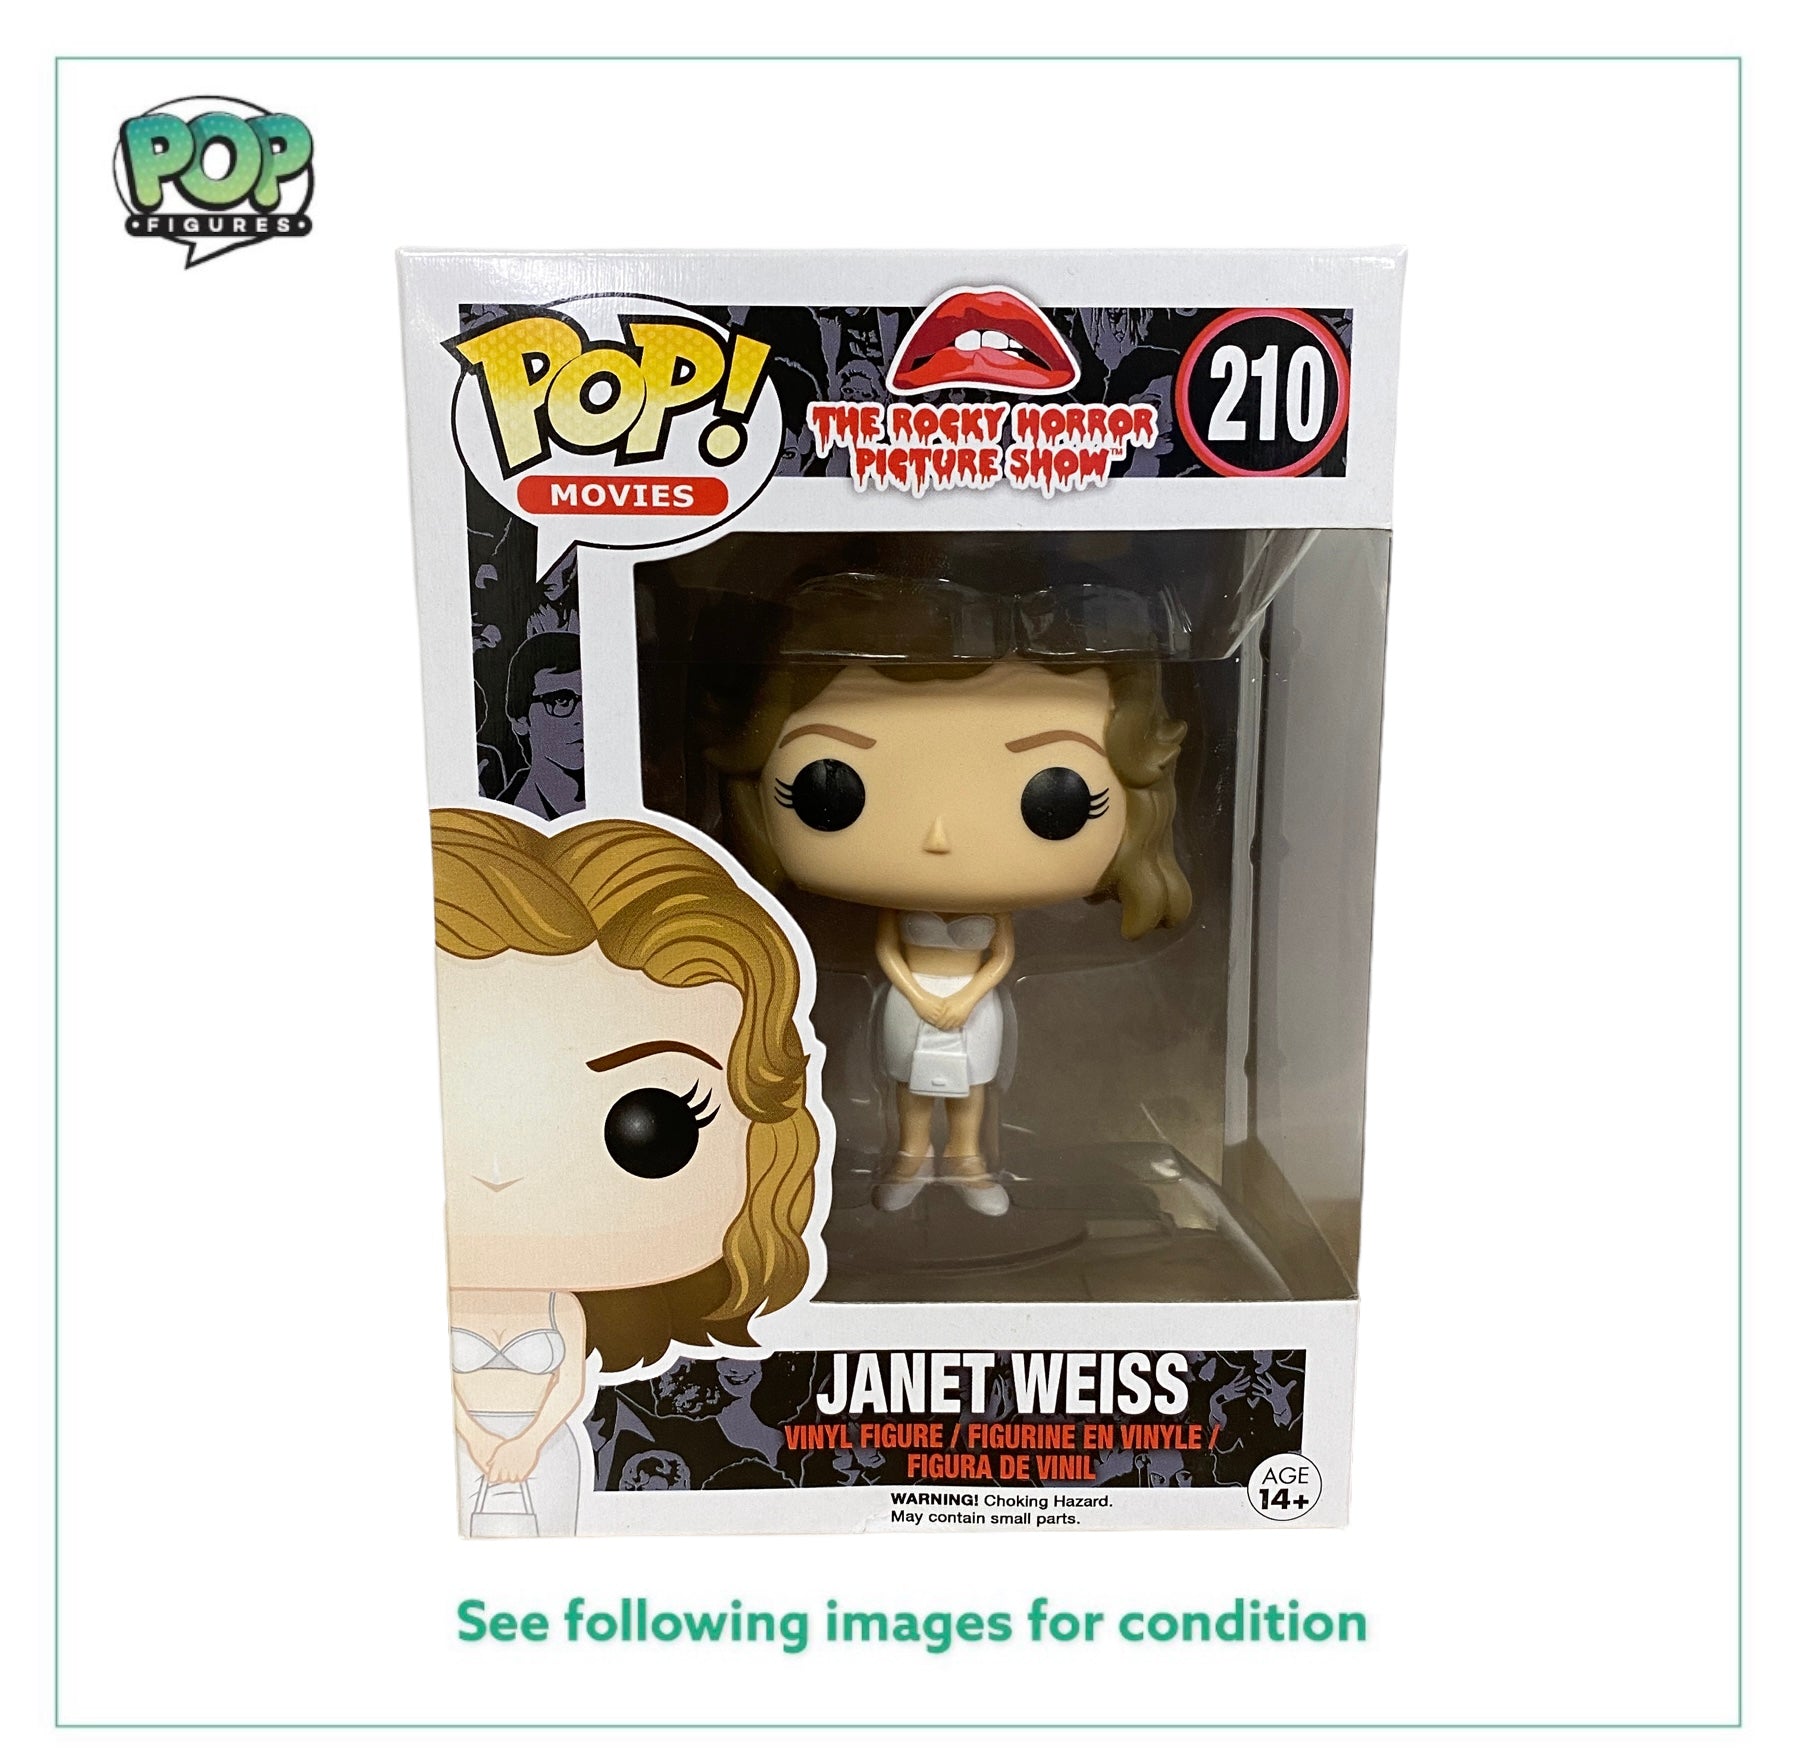 Janet Weiss #210 Funko Pop! - The Rocky Horror Show - 2015 Pop! - Condition 8/10